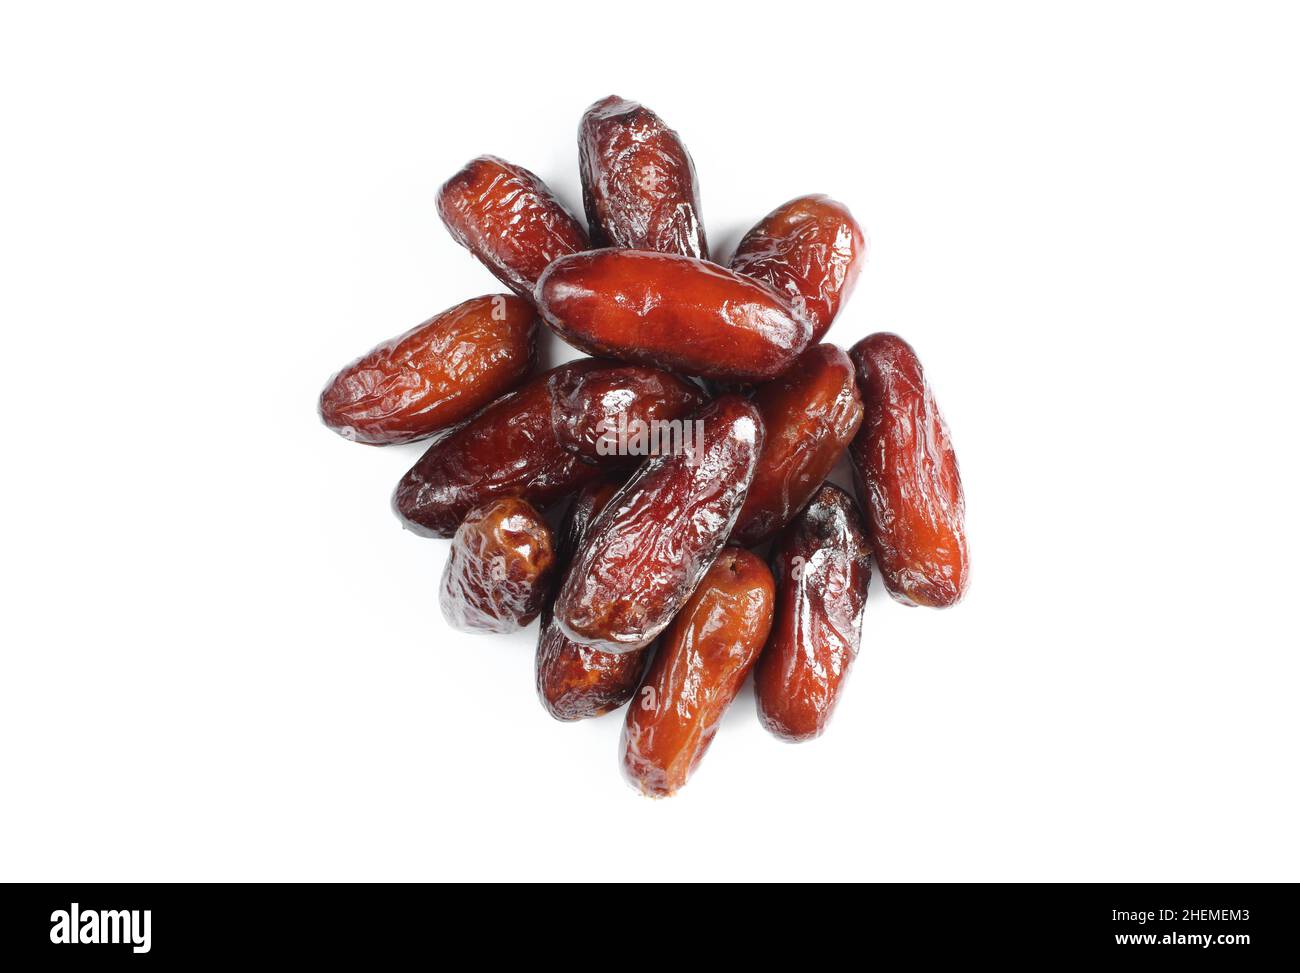 Pile of tasty dry dates isolated on white background. Arabic food Stock Photo